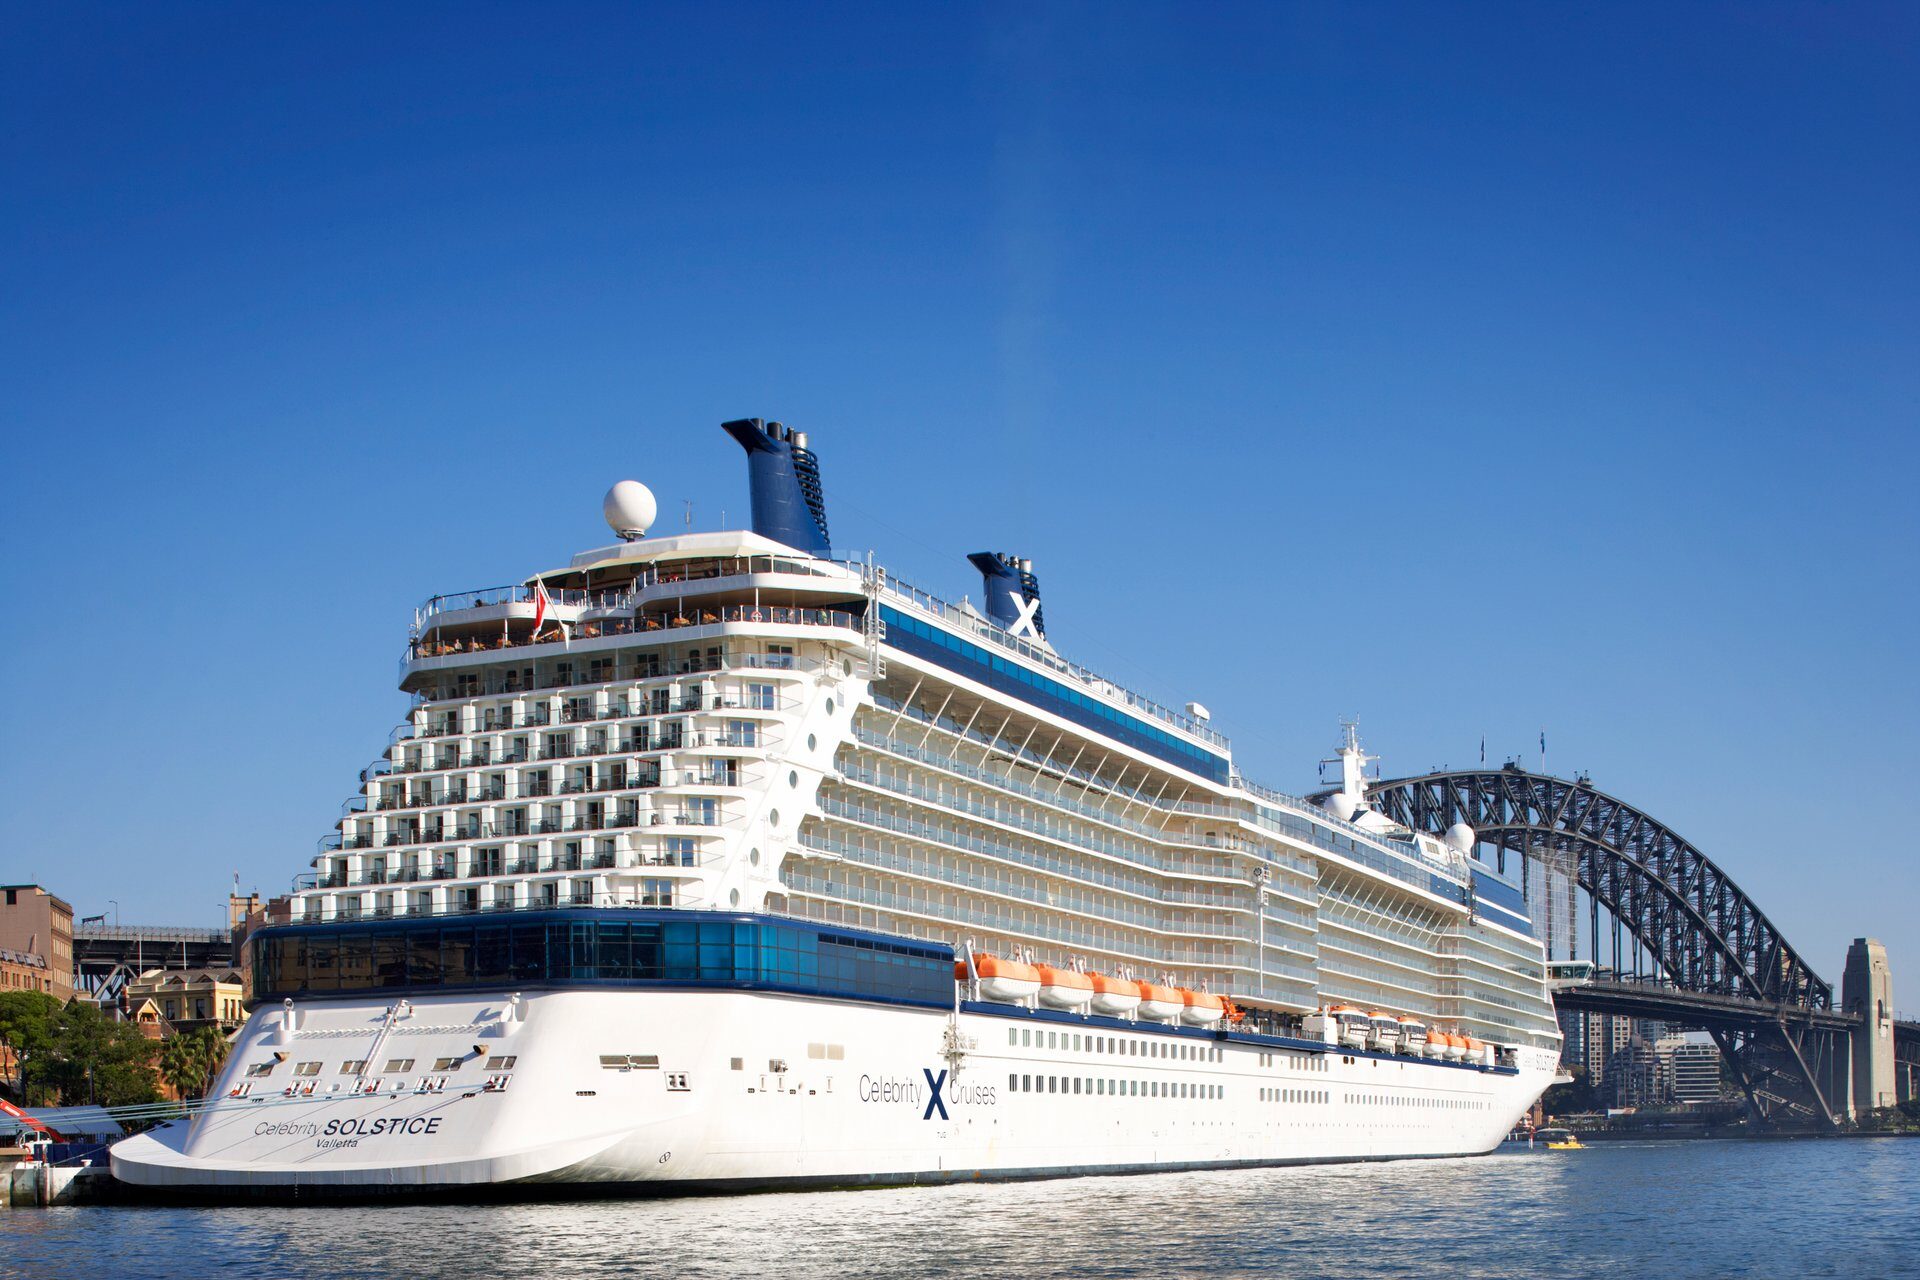 pictures of celebrity solstice cruise ship